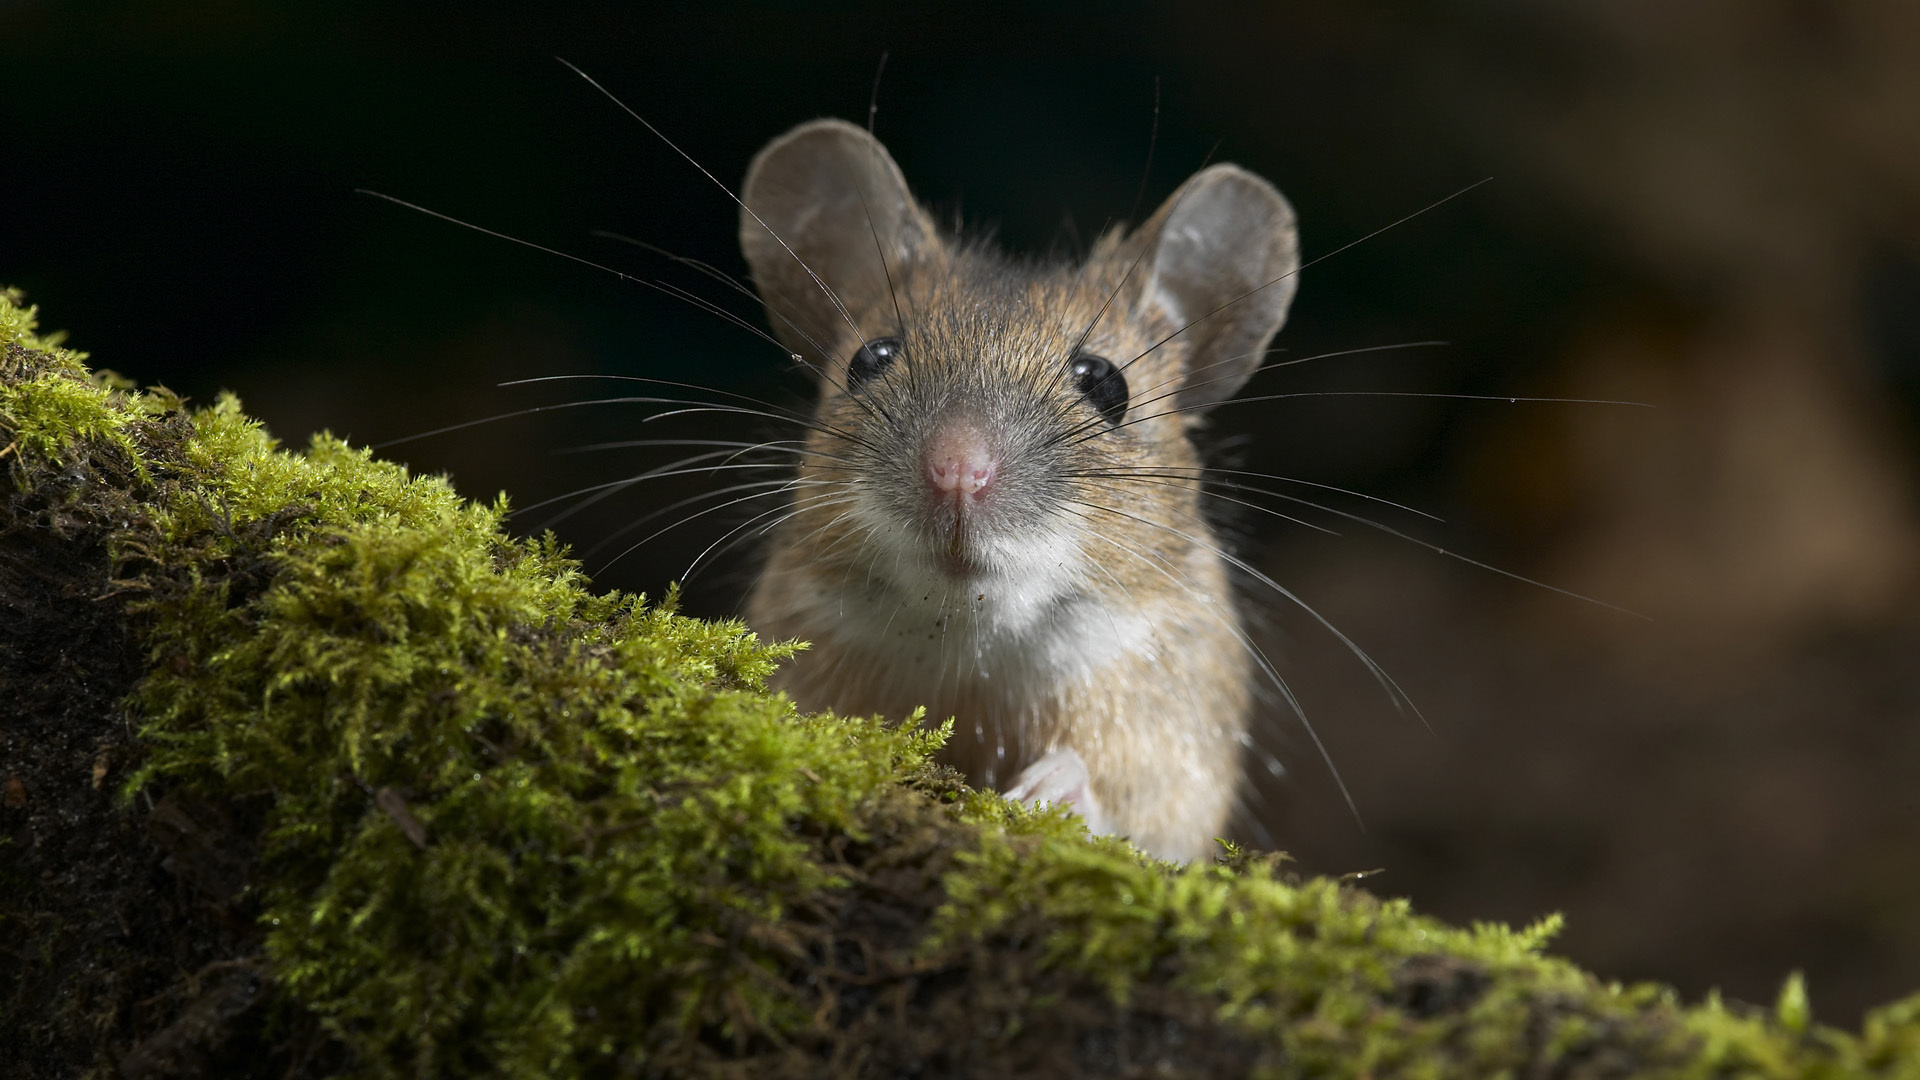 Mouse wallpaper, Cute rodent, Nature photography, Backgrounds, 1920x1080 Full HD Desktop